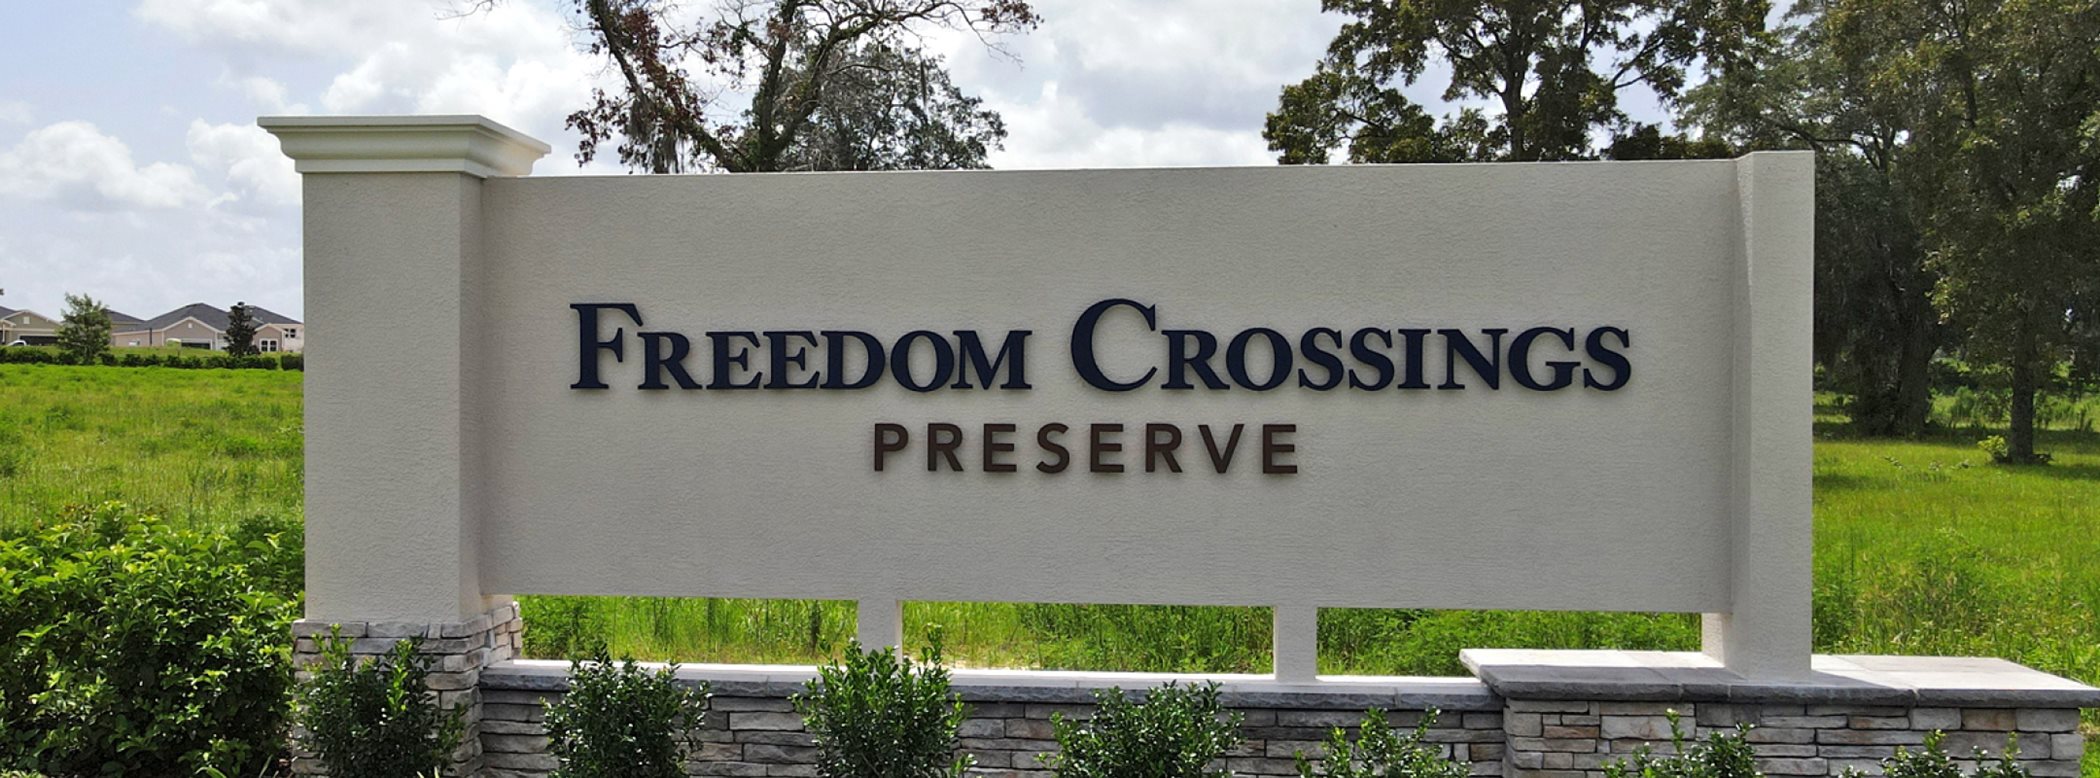 Freedom Crossings Preserve entry sign